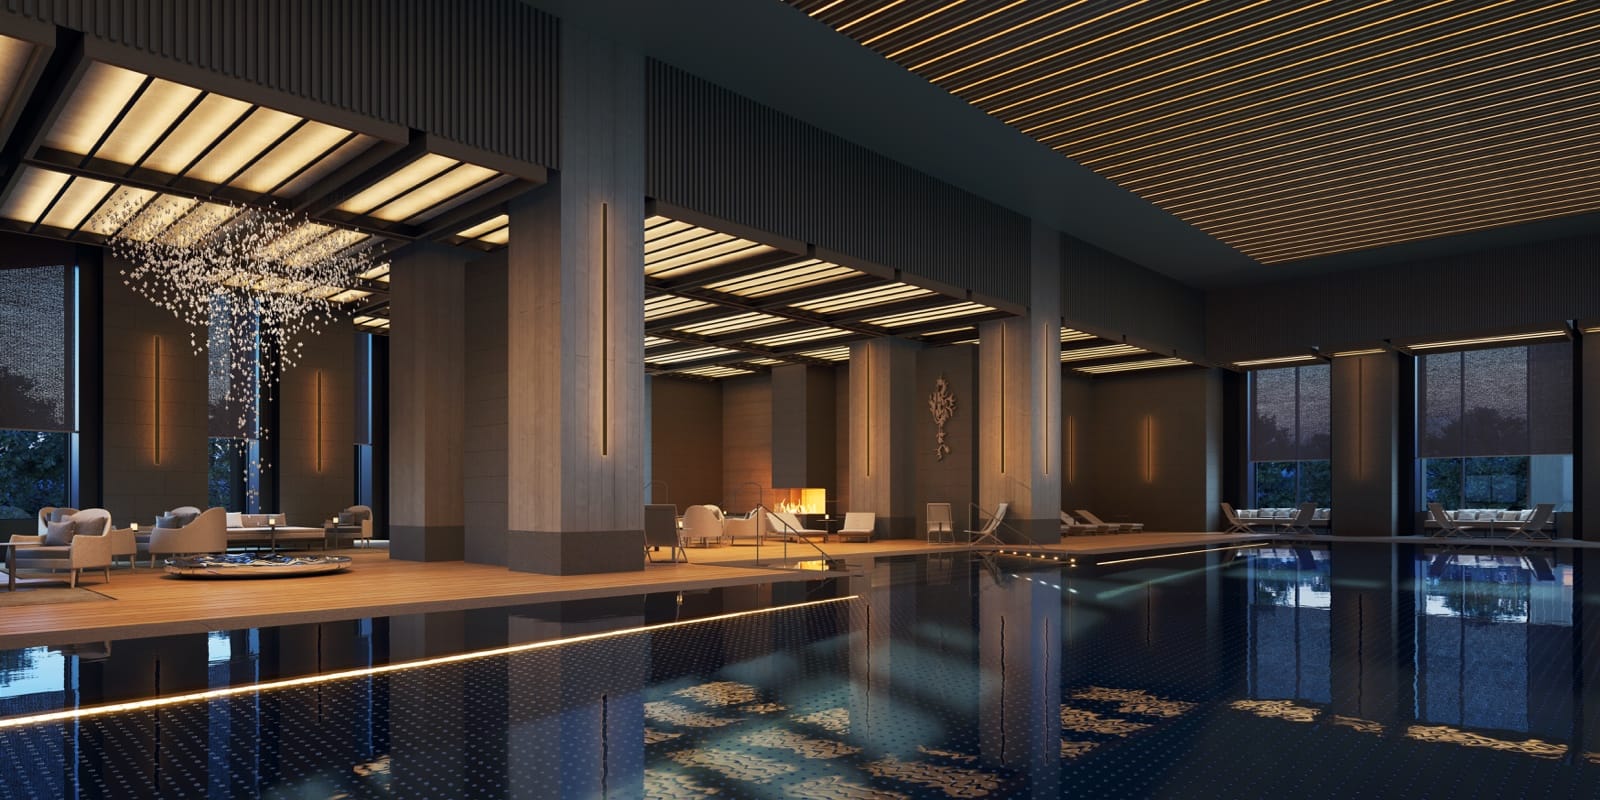 Japan’s Latest Luxury Hospitality Setting to Open in Autumn 2023